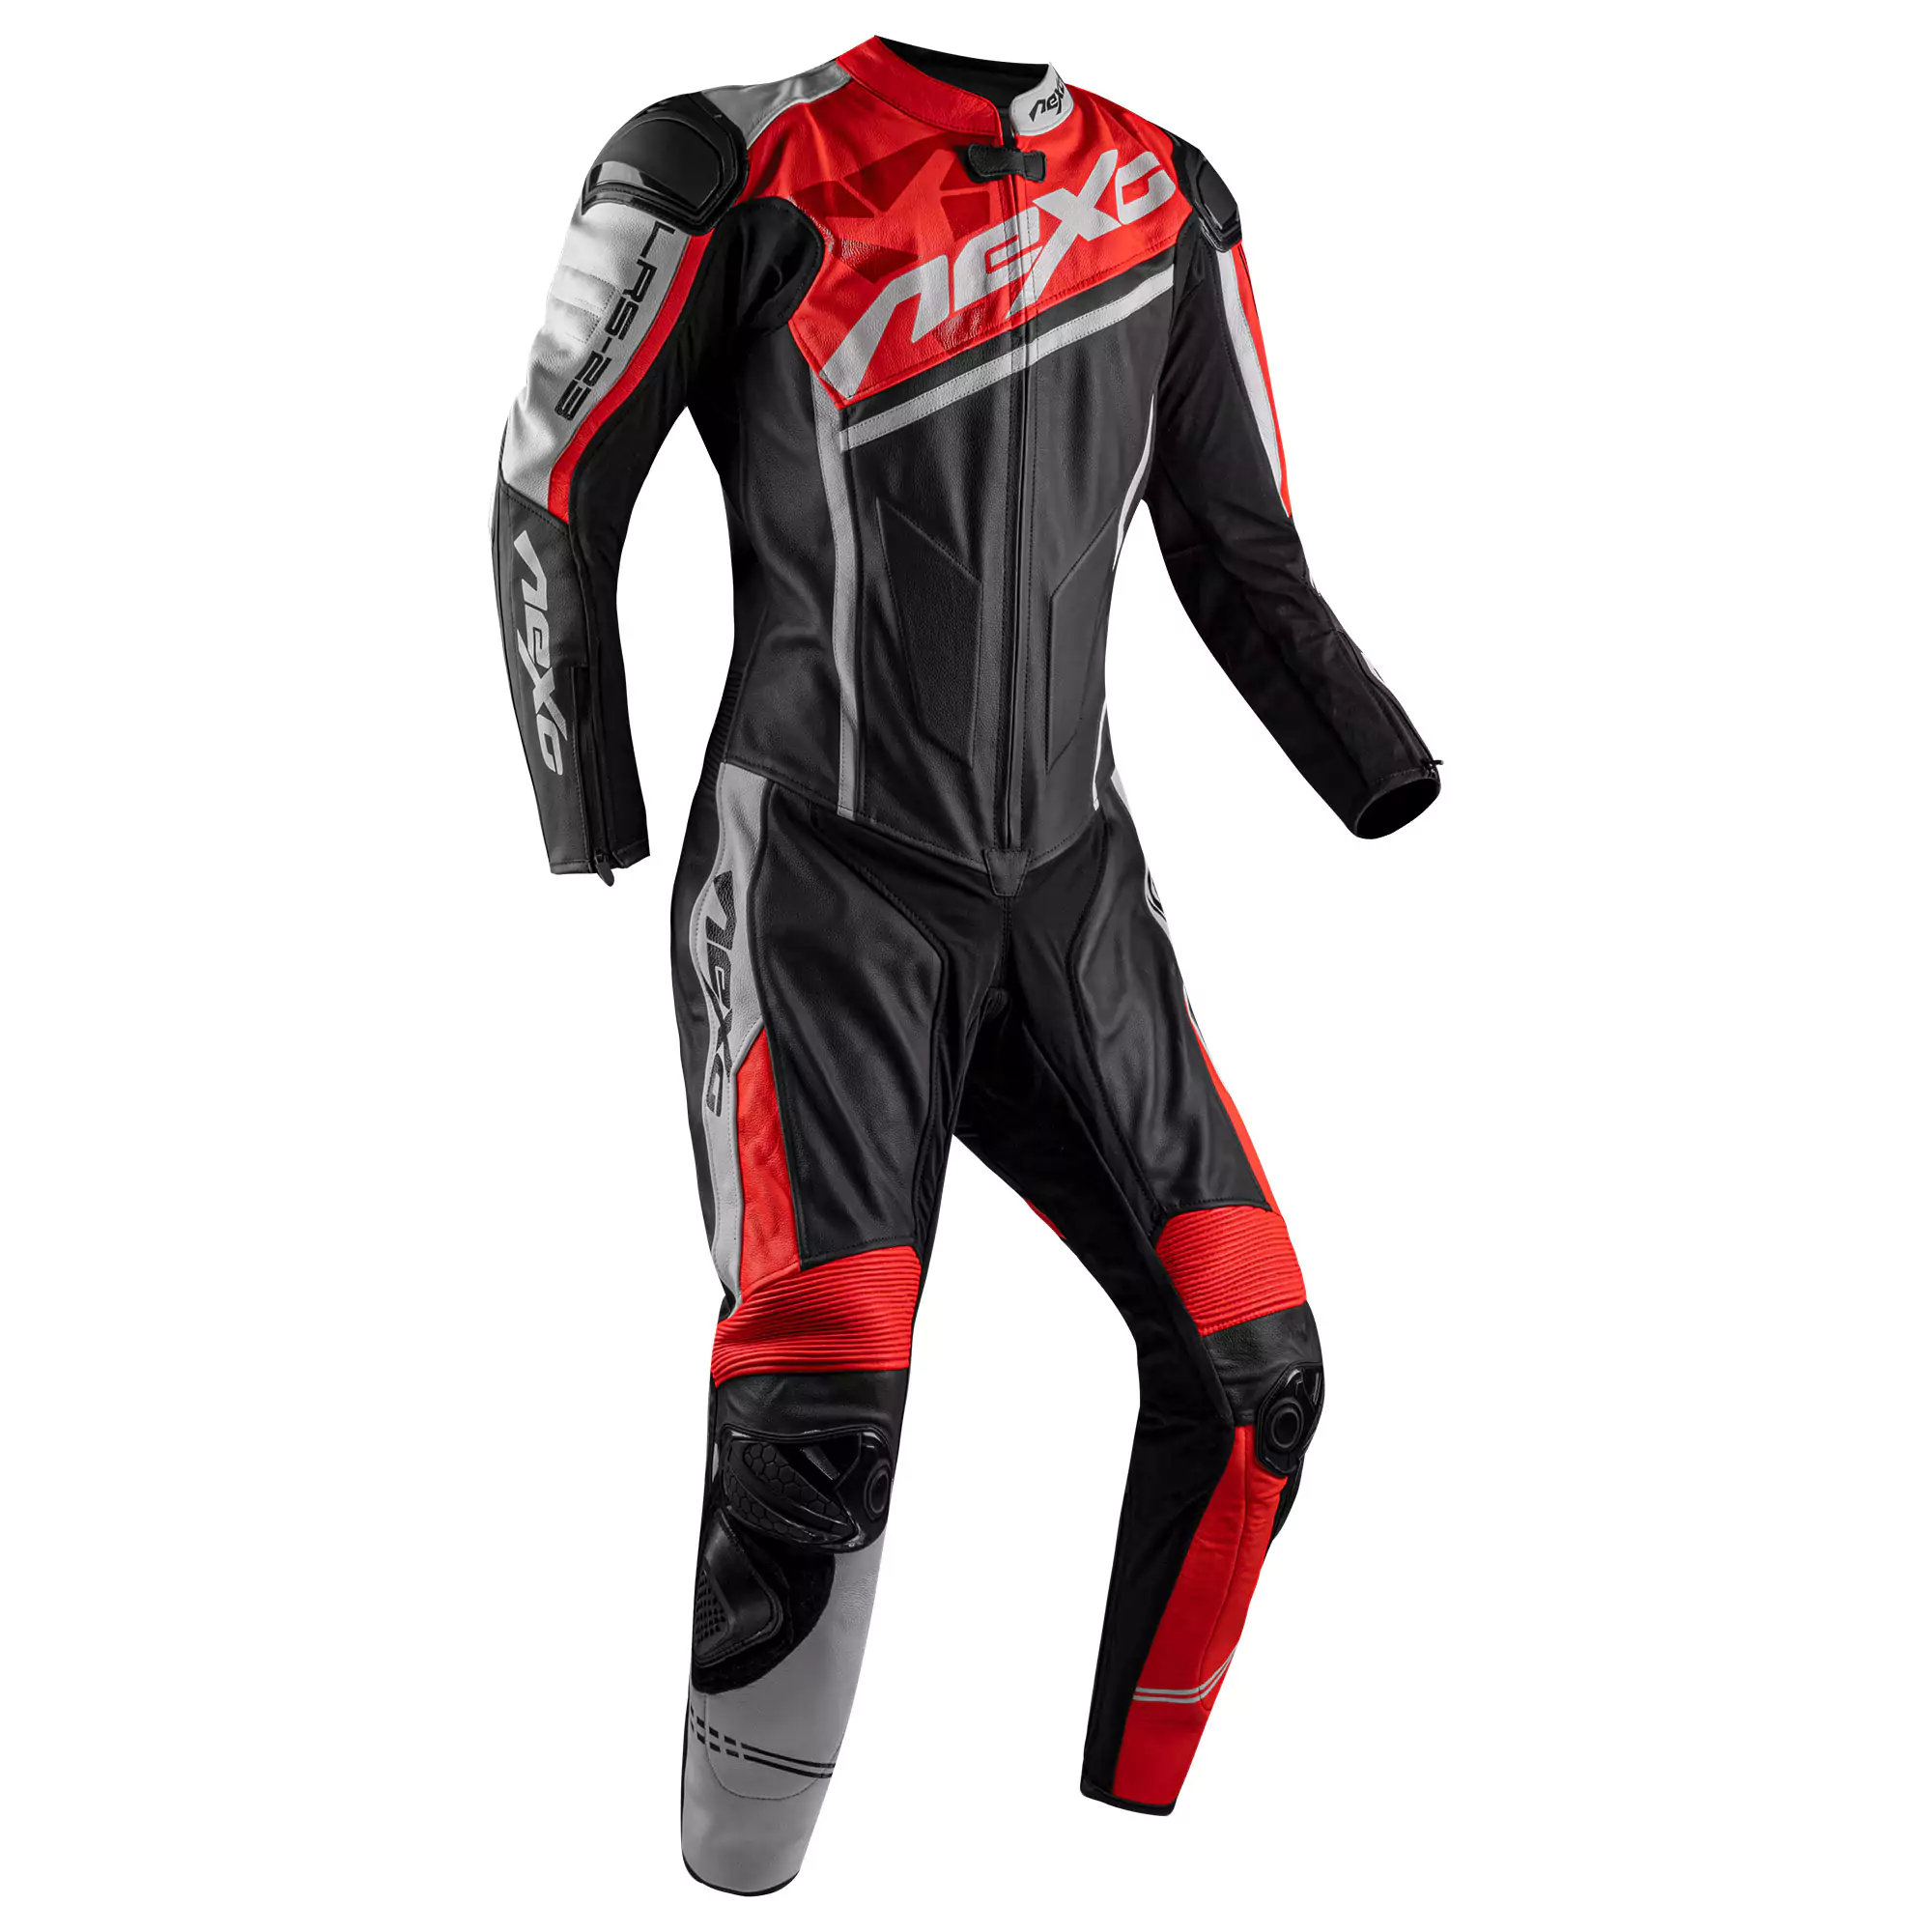 Leather motorcycle full suit with protective armor and racing design.